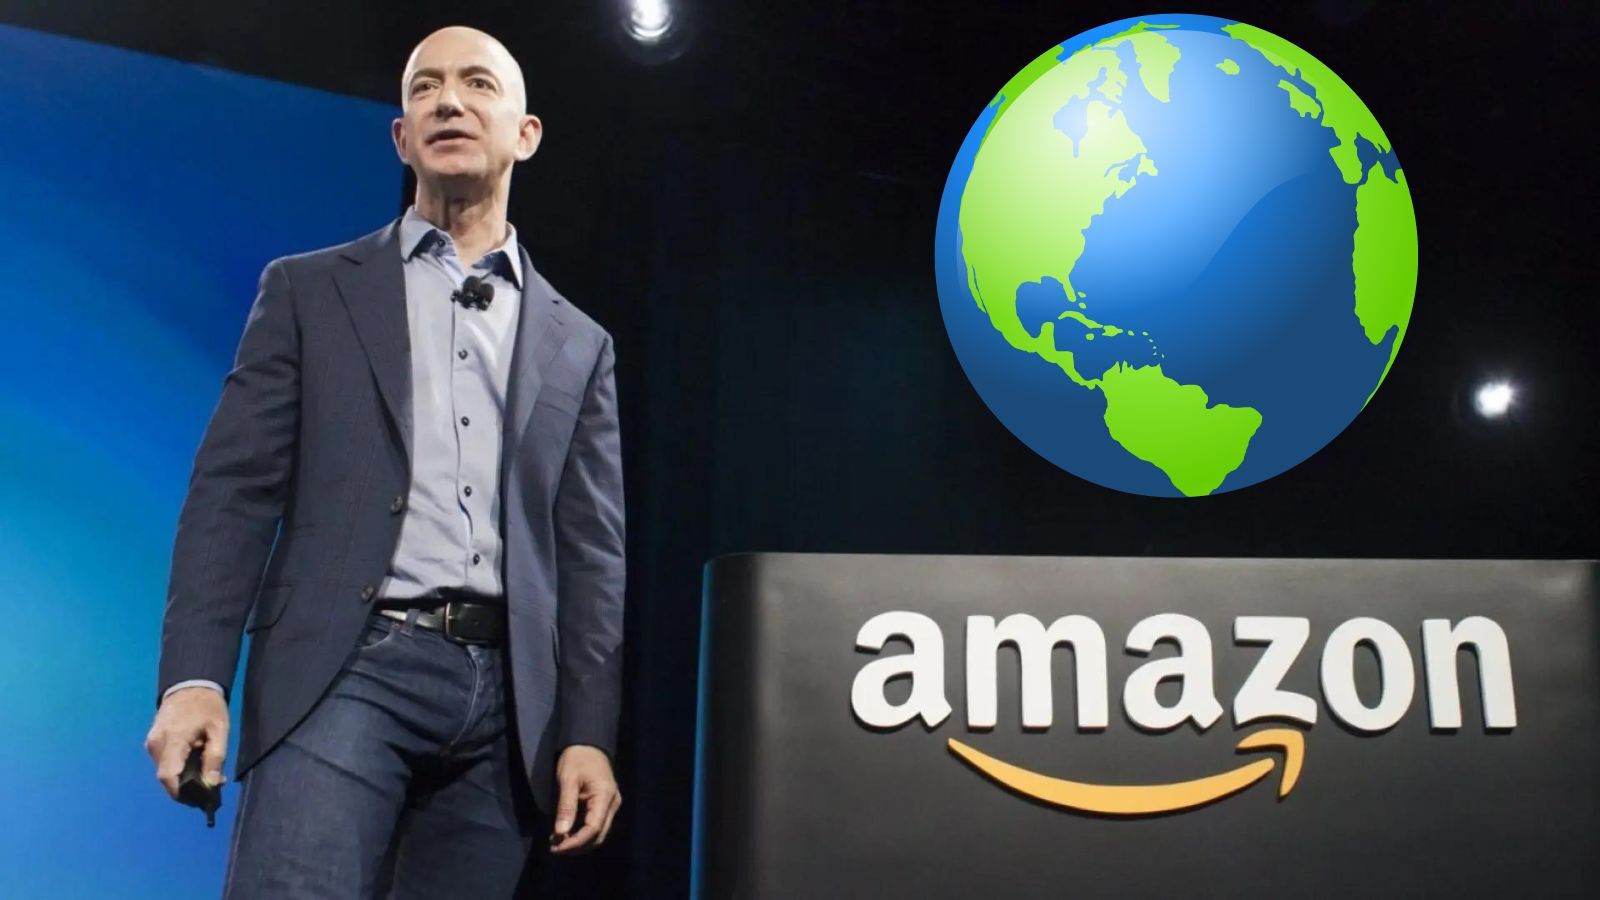 Is Amazon Too Big? (What Do the Experts Say)